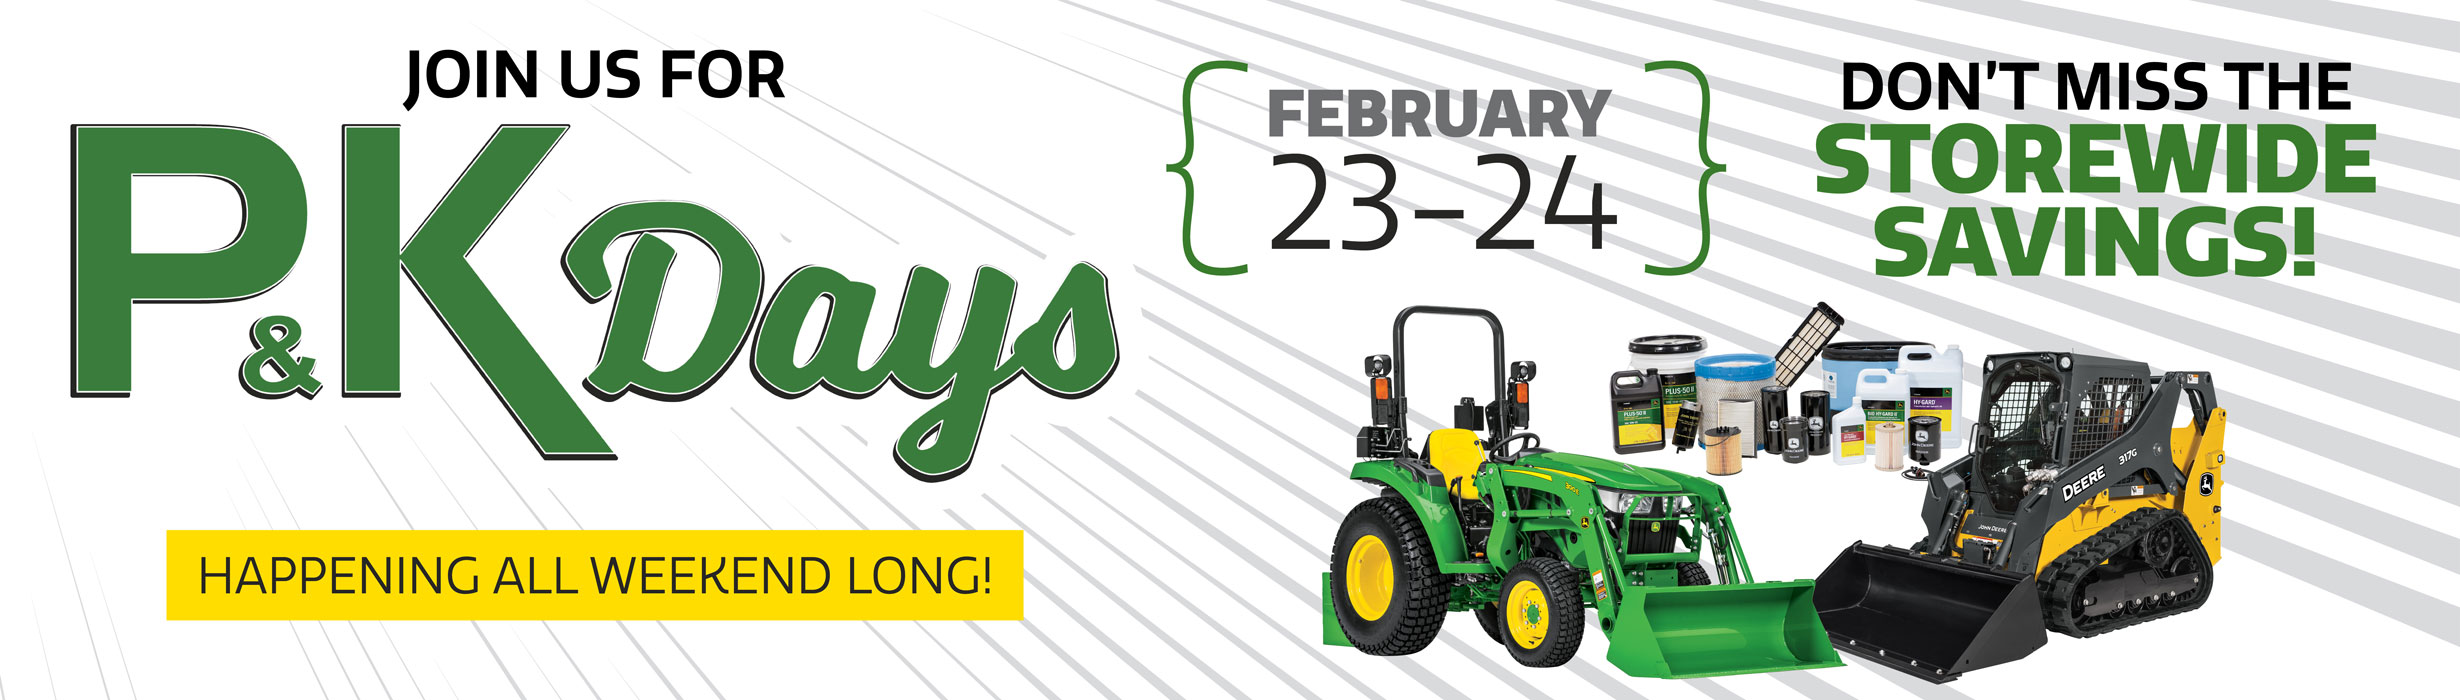 Join us February 23rd & 24th for our P&K Days Sales Event